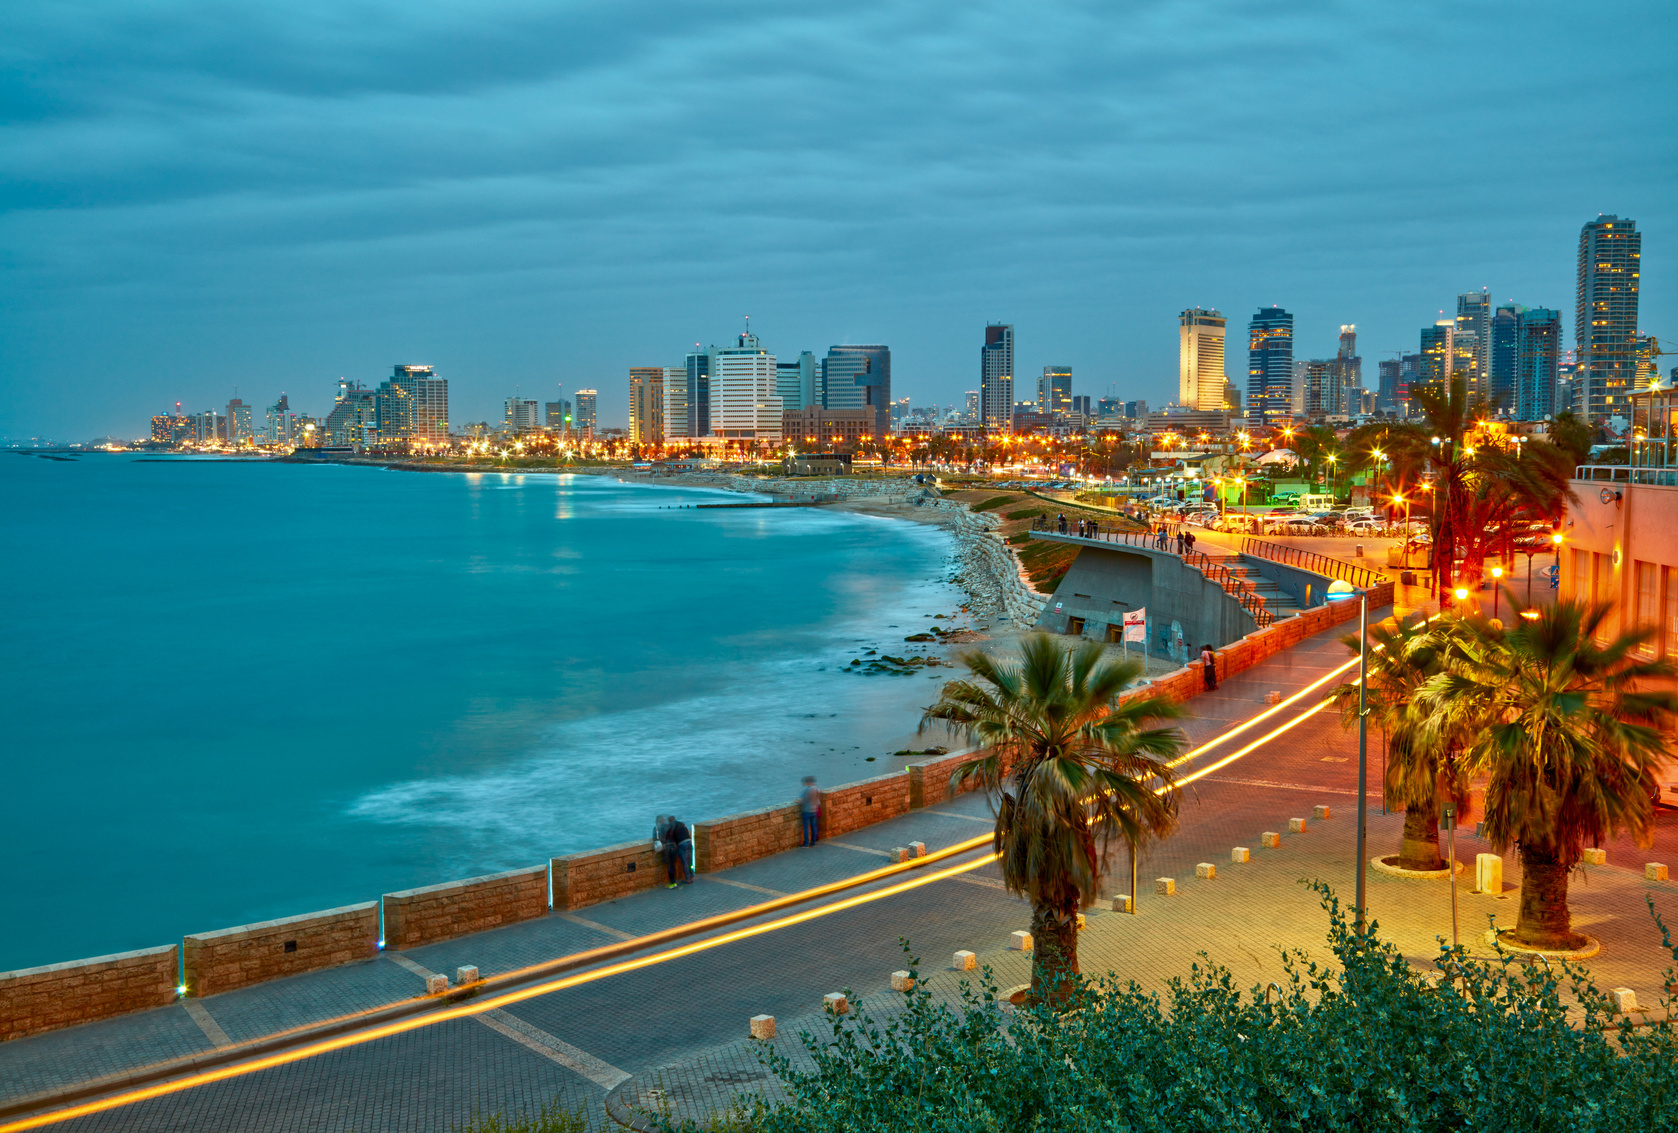 Tel Aviv, Israel. After sunset view from Jaffa